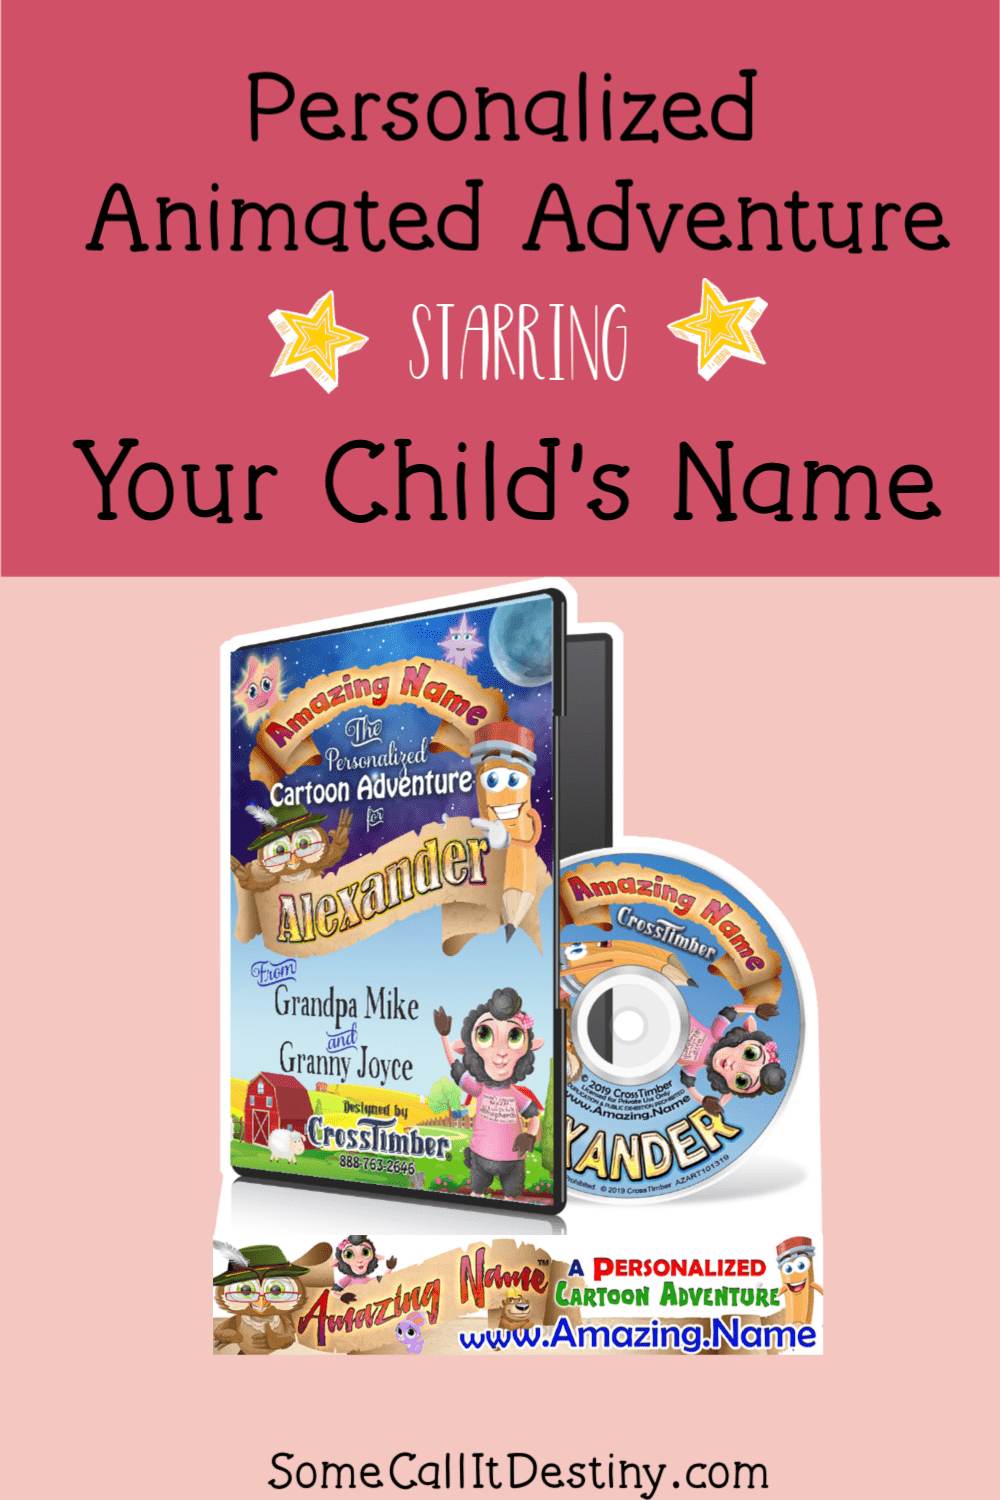 Personalized animated adventure for your child's name